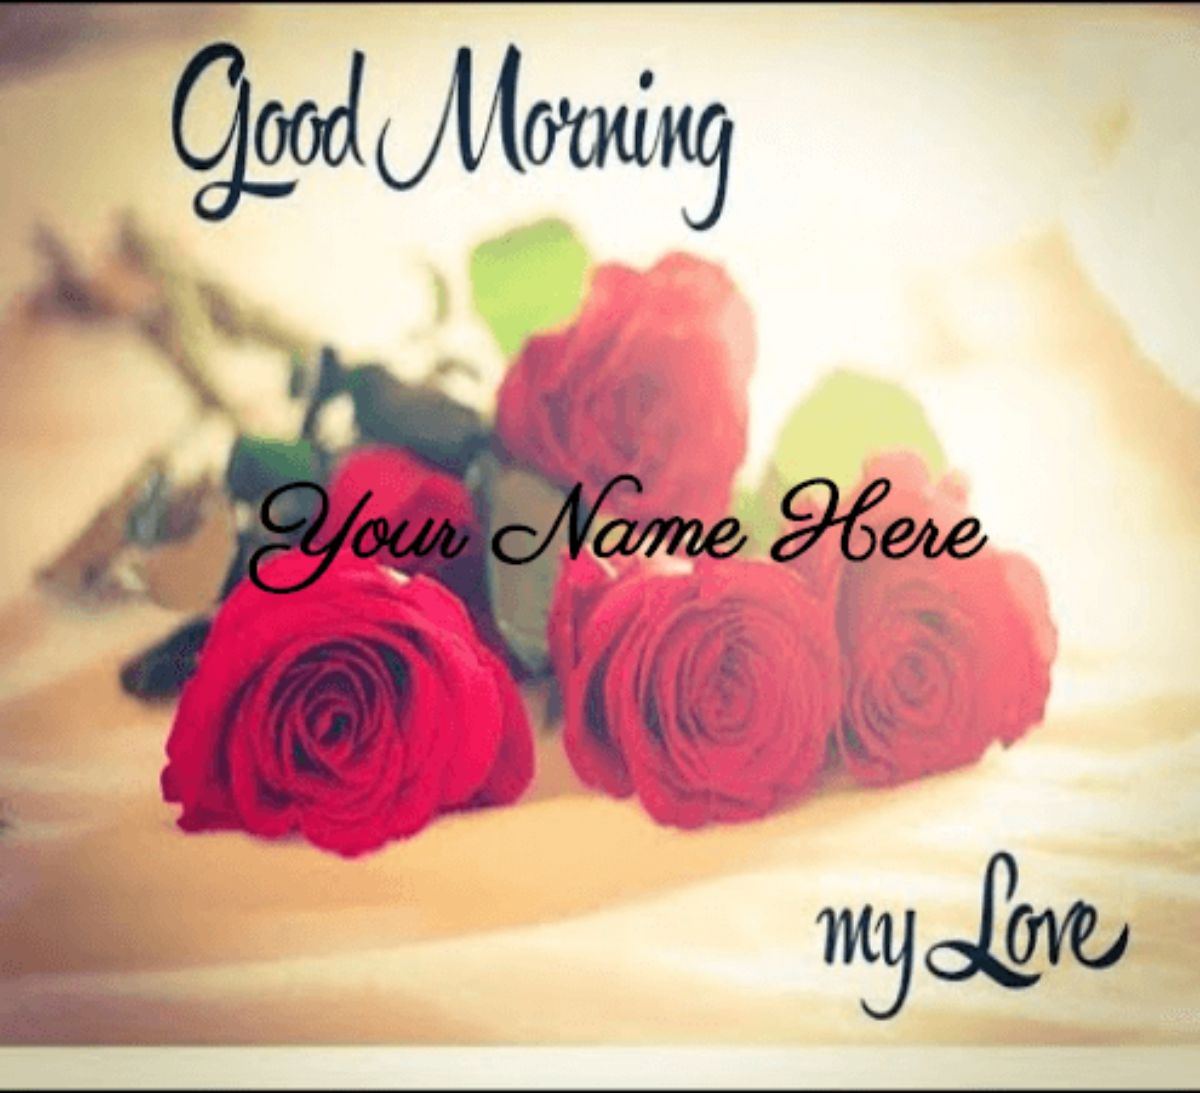 Good morning love card - Good Morning Wishes With Name